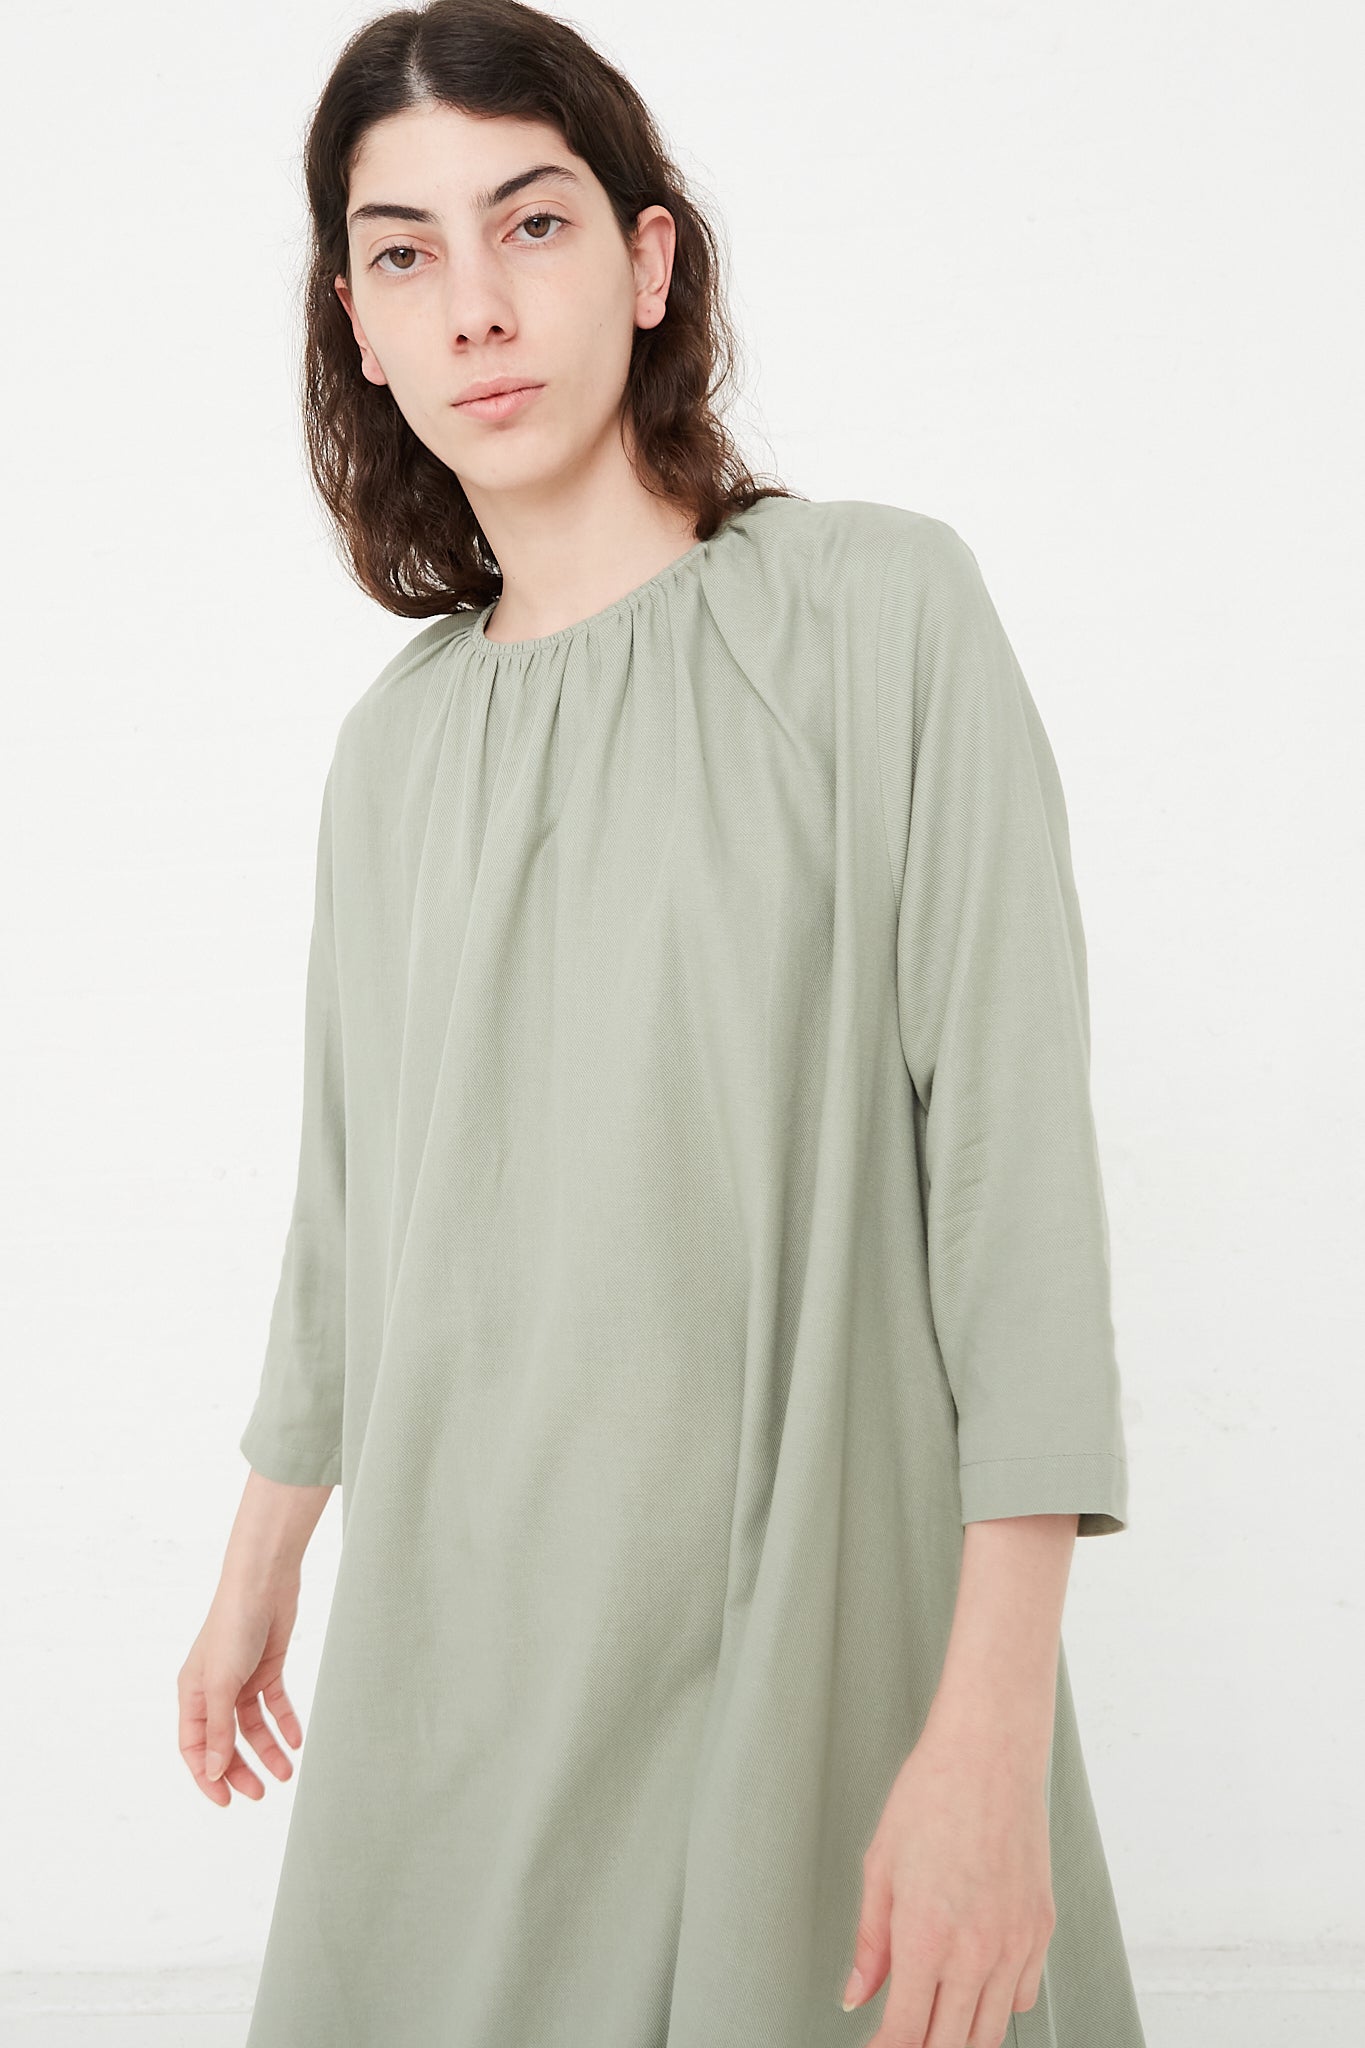 Cotton Twill Shirred Neck Dress in Agave by Black Crane for Oroboro Front Upclose